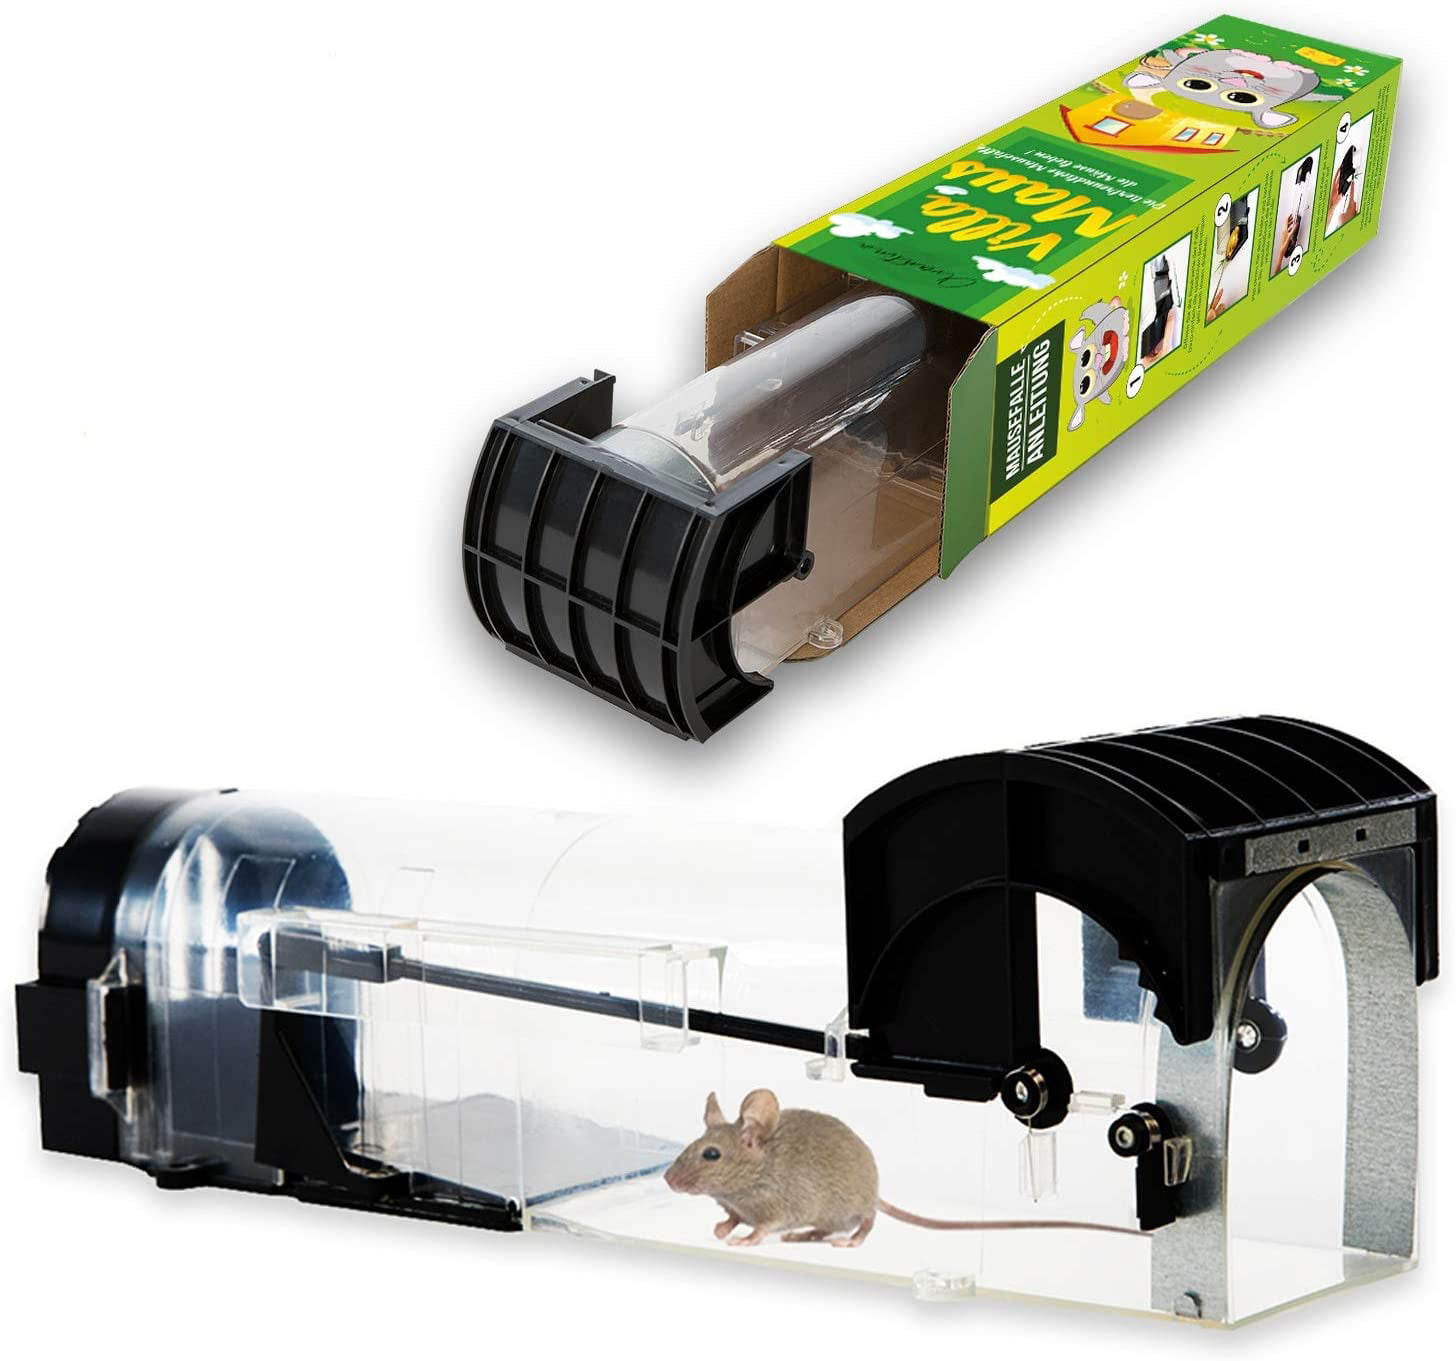 Details about   Rodent Animal Mouse Humane Live Trap Hamster Cage Mice Rat Control Catch Bait US 